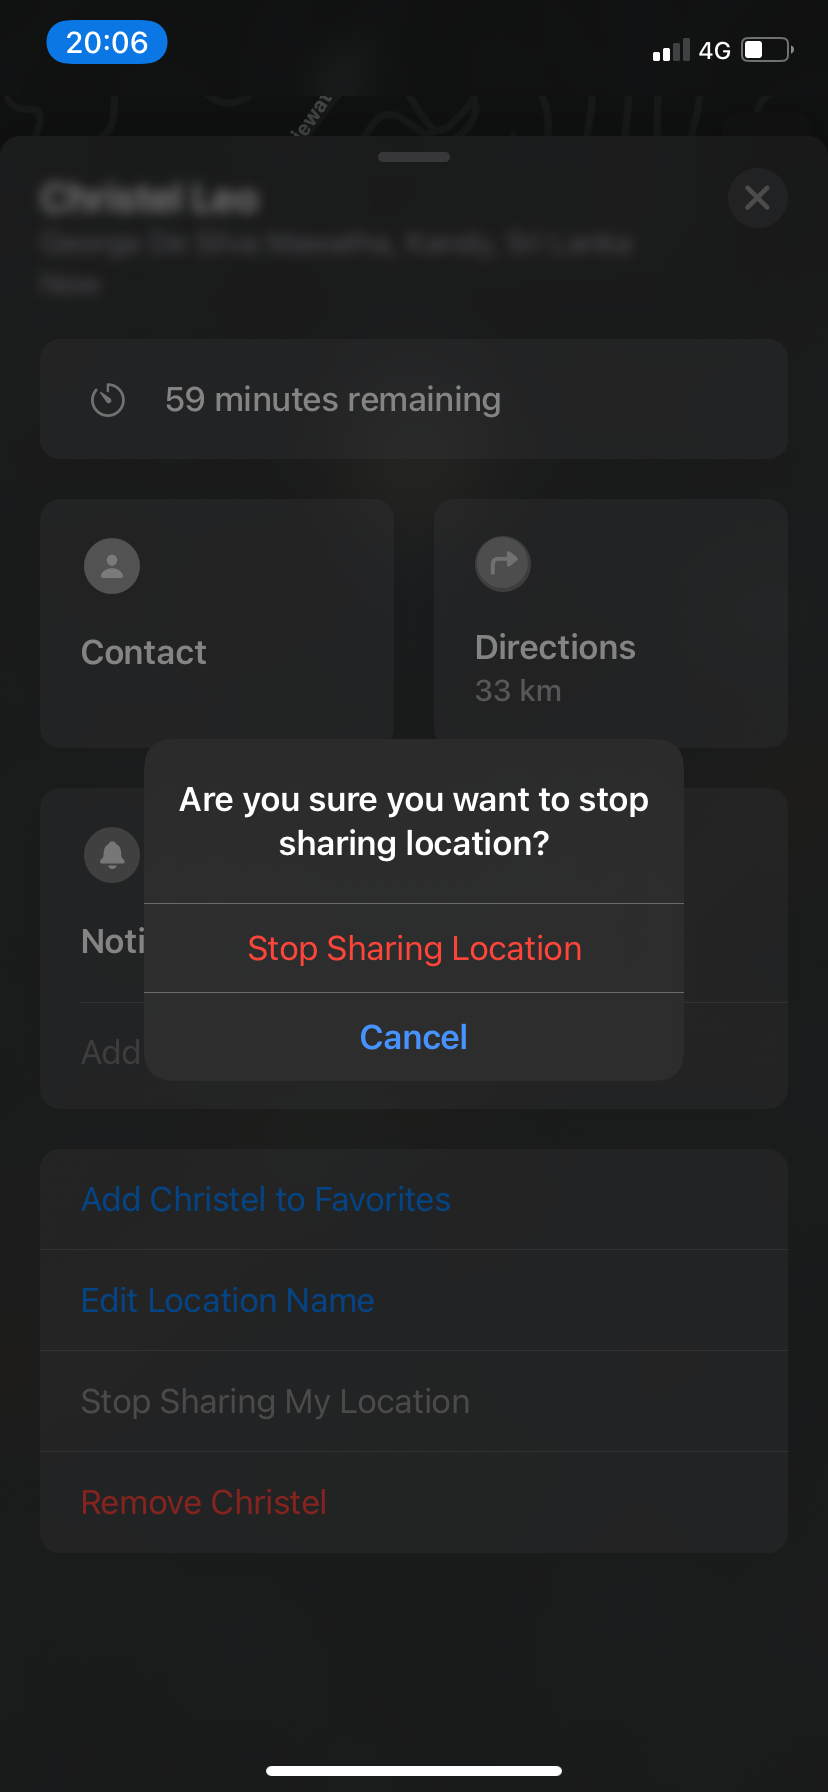 Disabling location sharing for the contact.